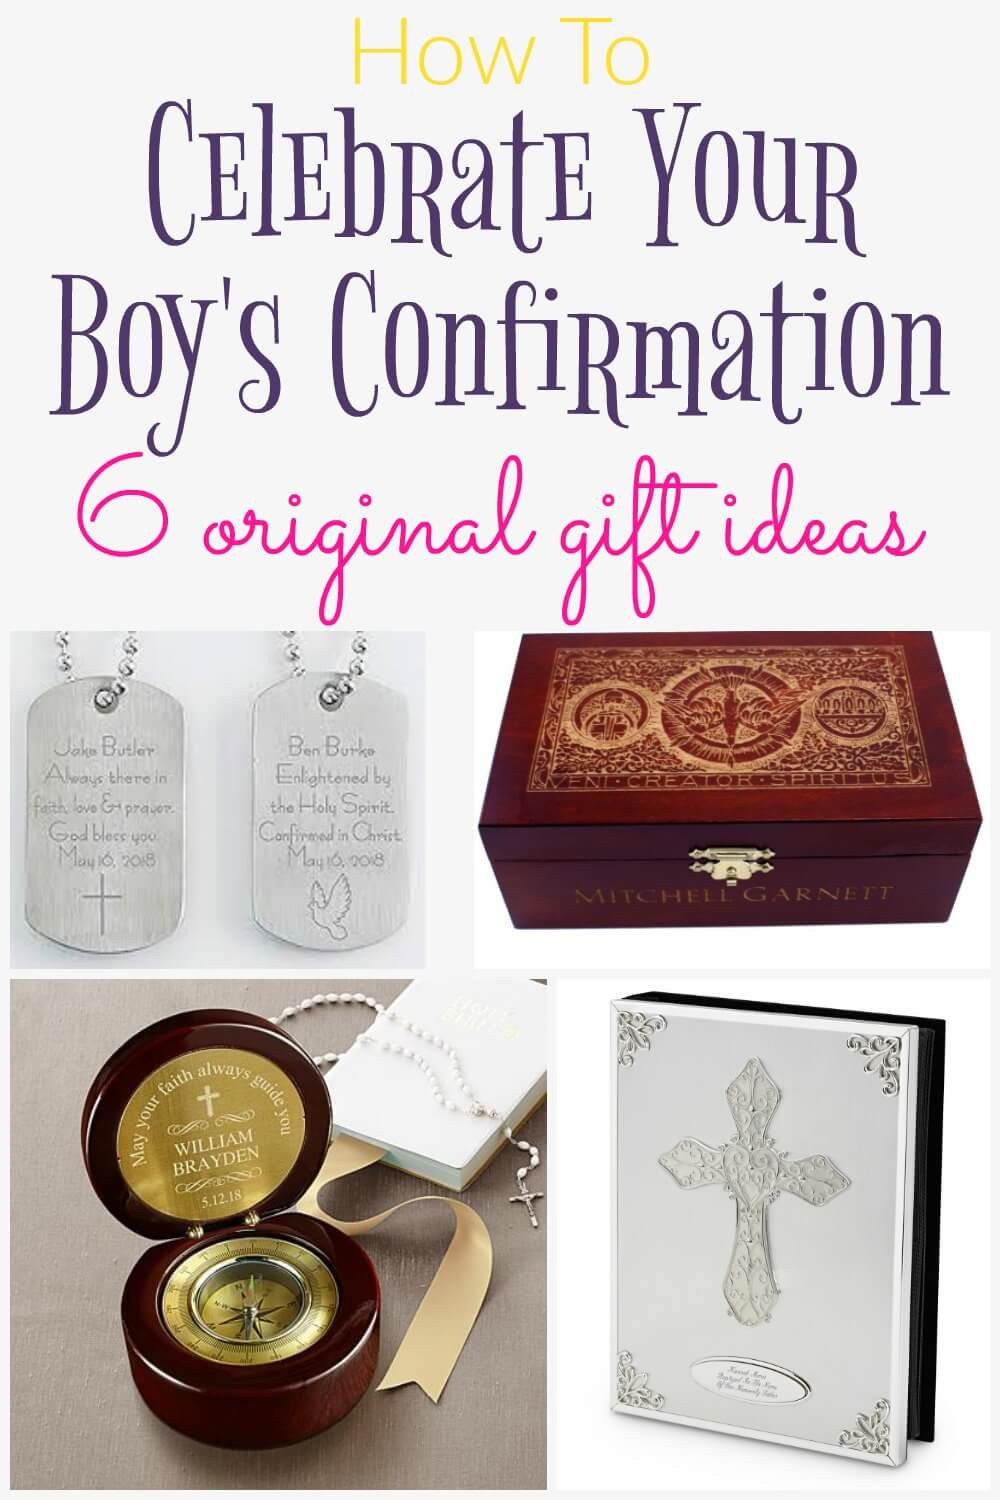 Confirmation Gift Ideas For Boys
 How to Celebrate Your Boy s Confirmation 6 Original Gift